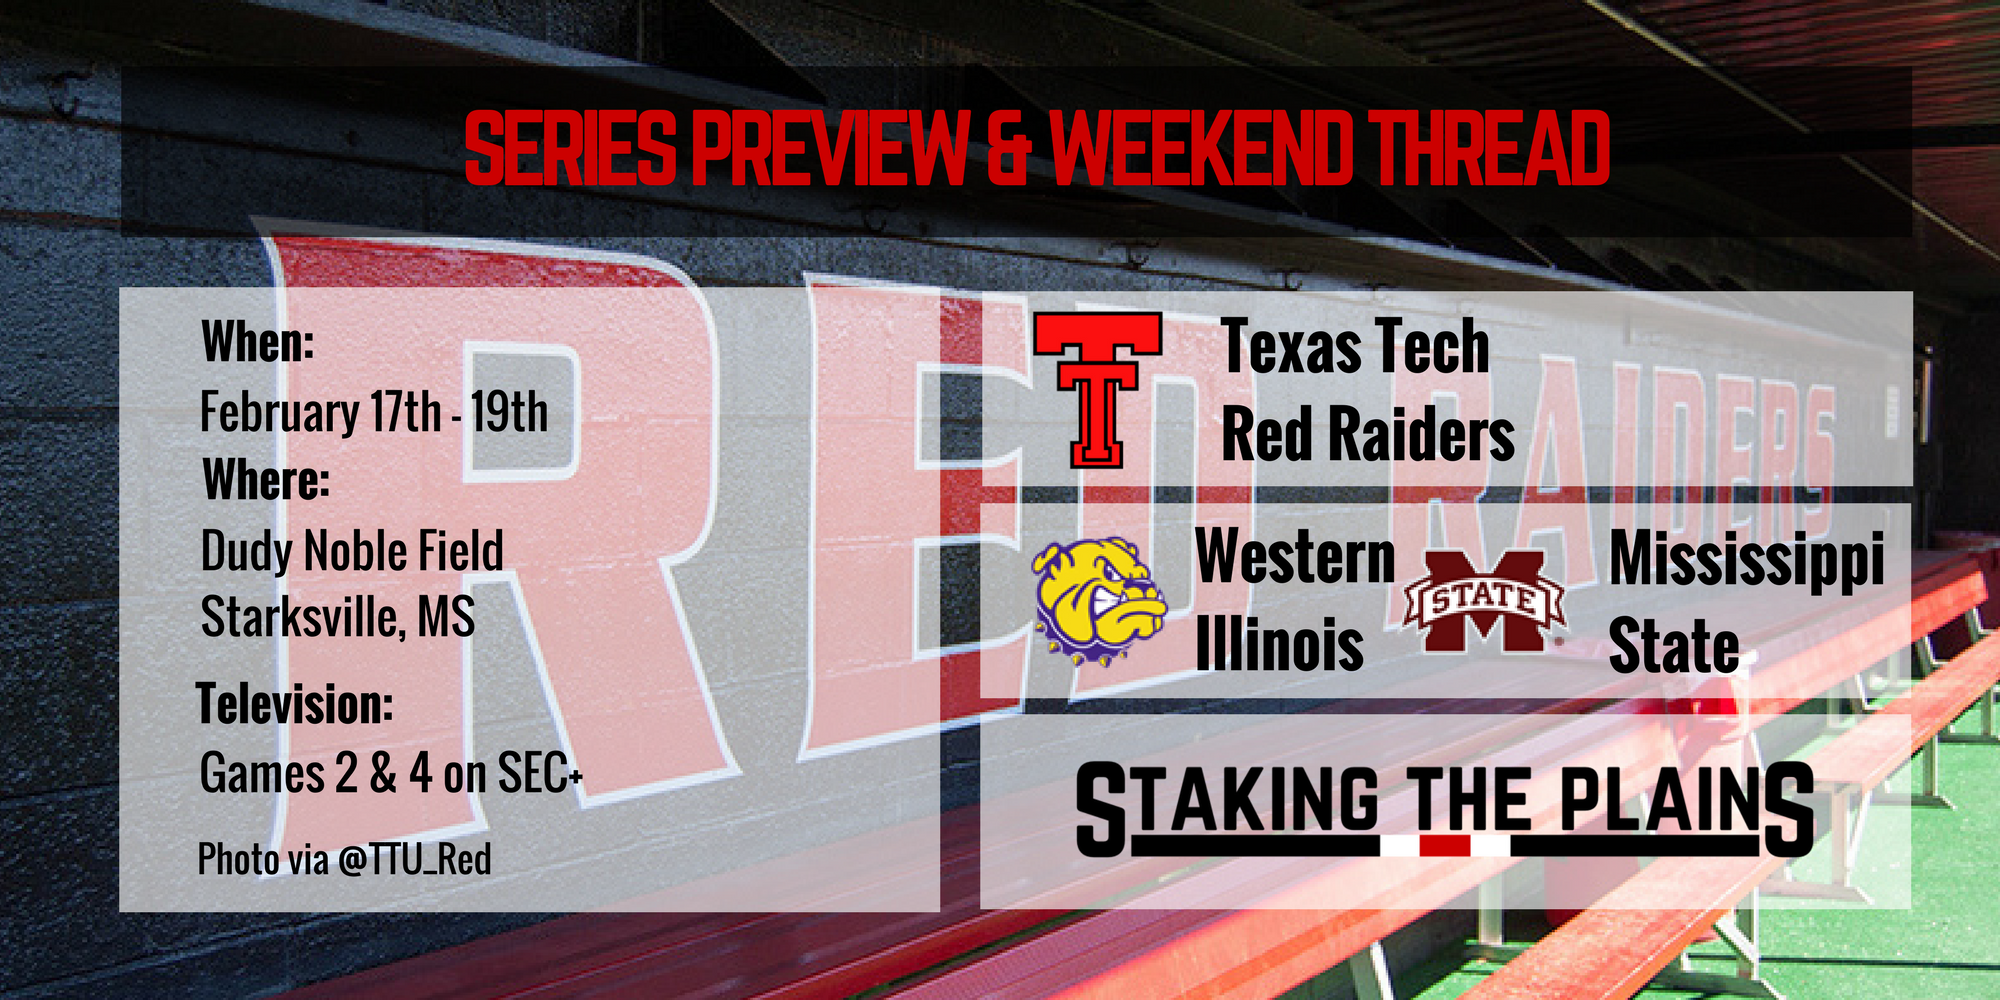 Series Preview & Weekend Thread: Texas Tech vs. Mississippi State & Western Illinois